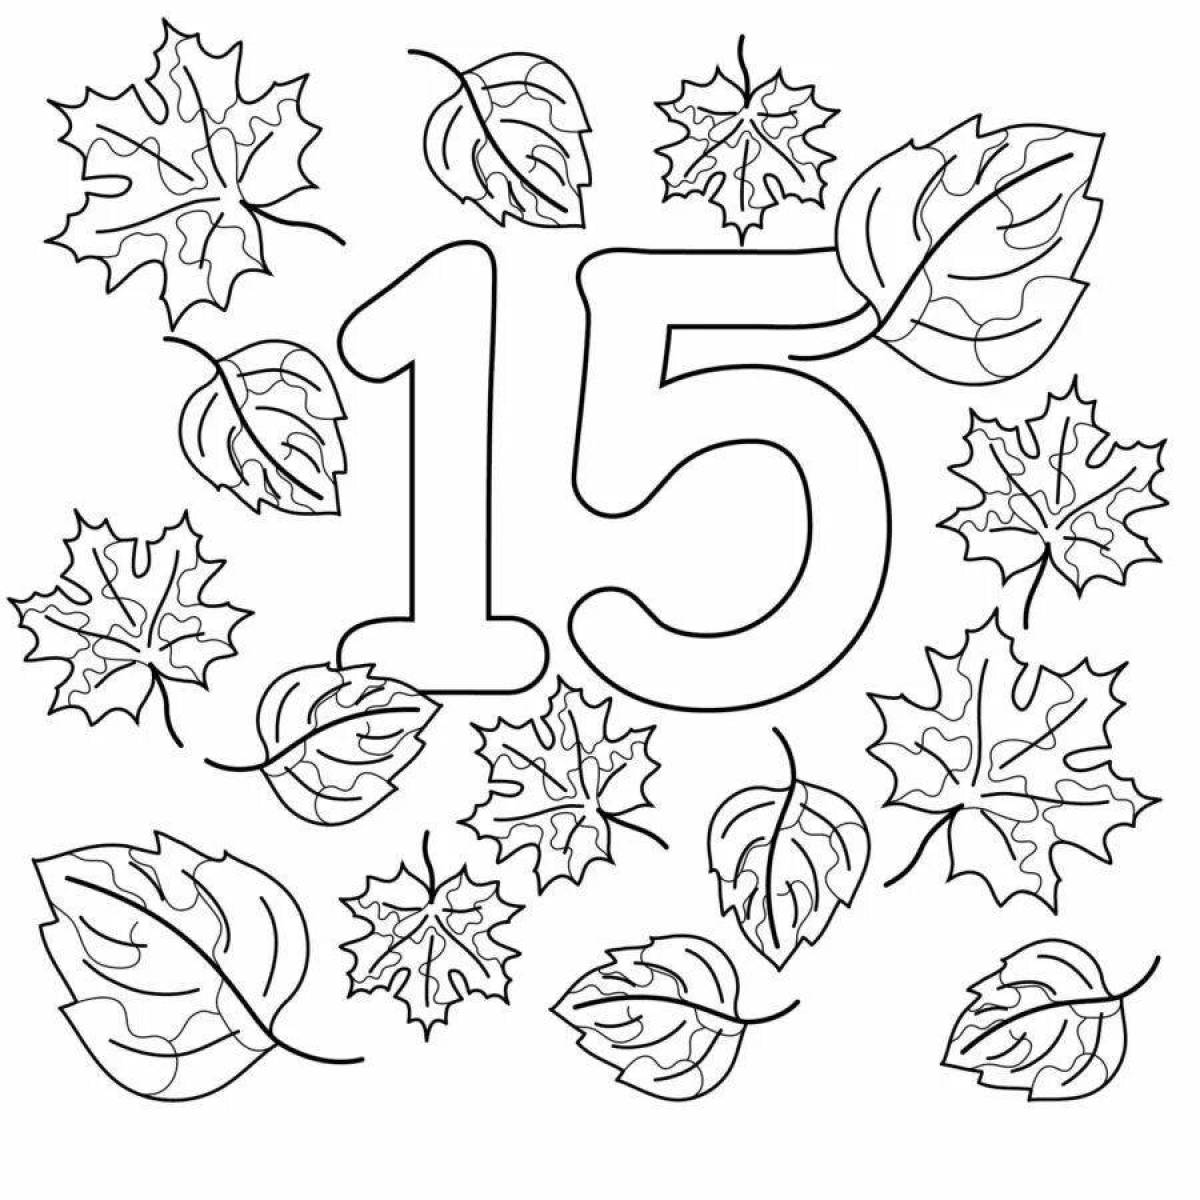 Shine coloring page 17